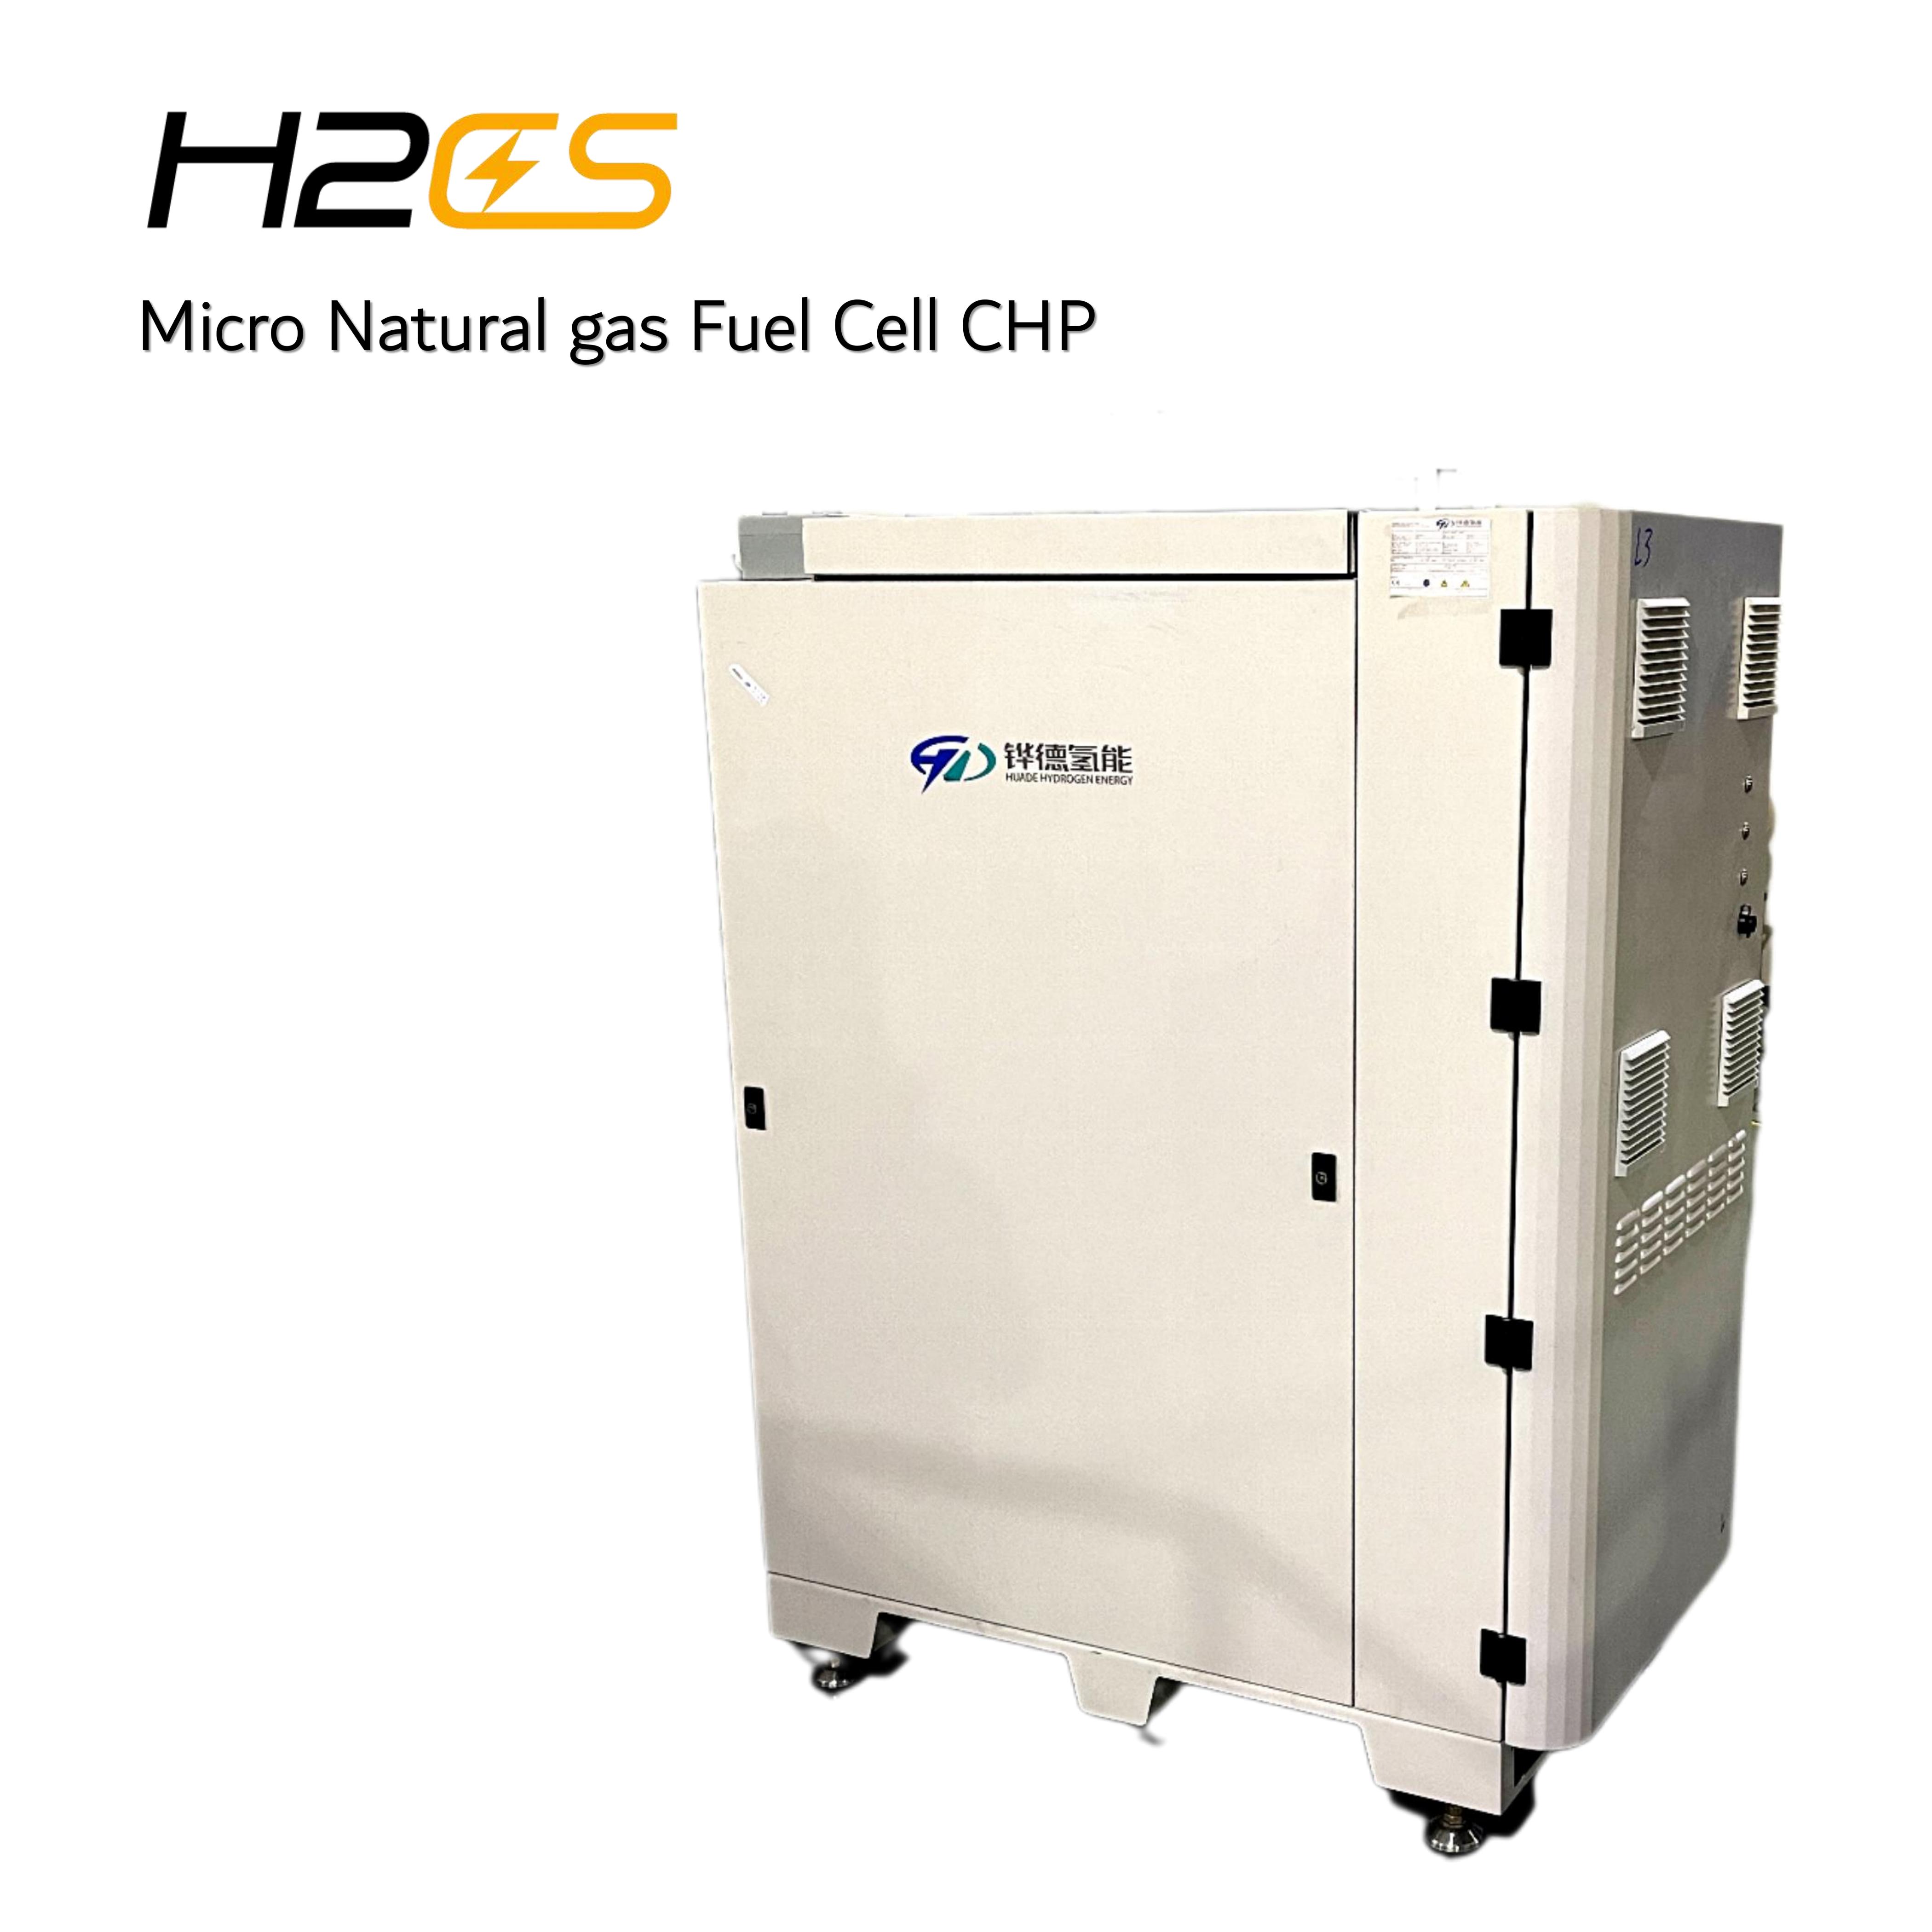 Microgrid Fuel Cell Domestic CHP System